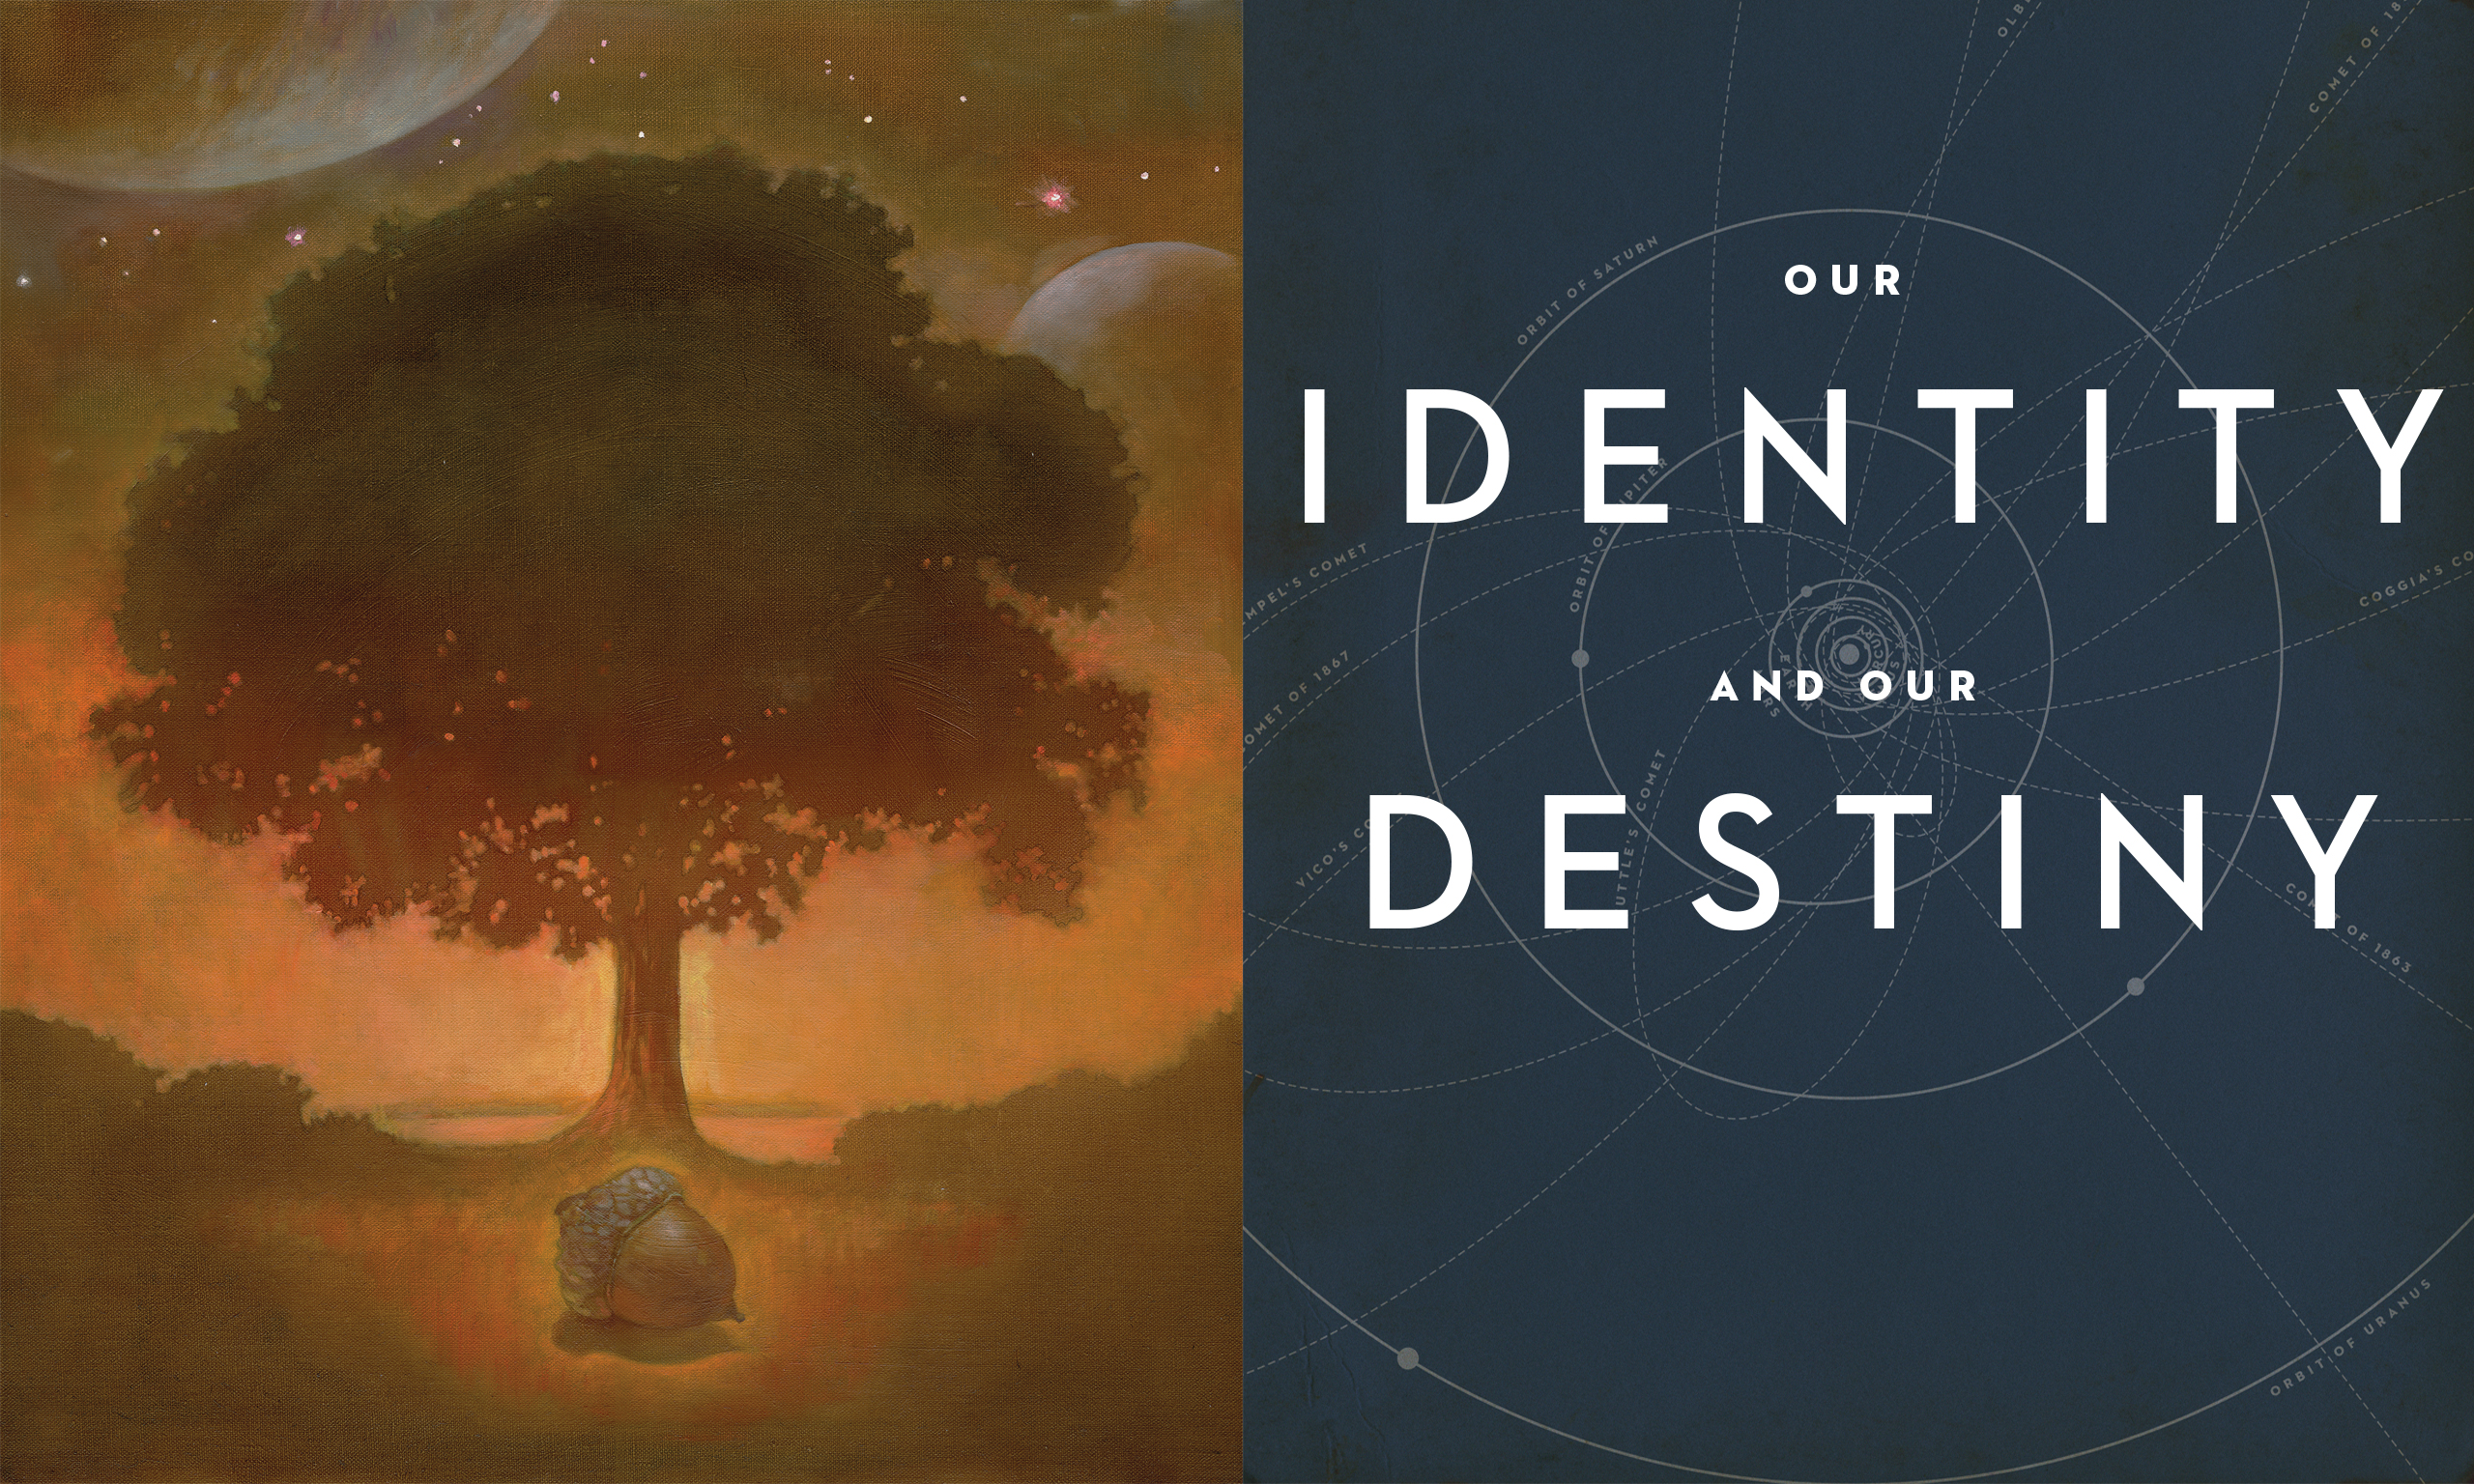 Illustration of the silhouette of an oak tree lit from behind, with an acorn in the foreground. The title for the article, "Our Identity and Our Destiny," is alongside the illustration.